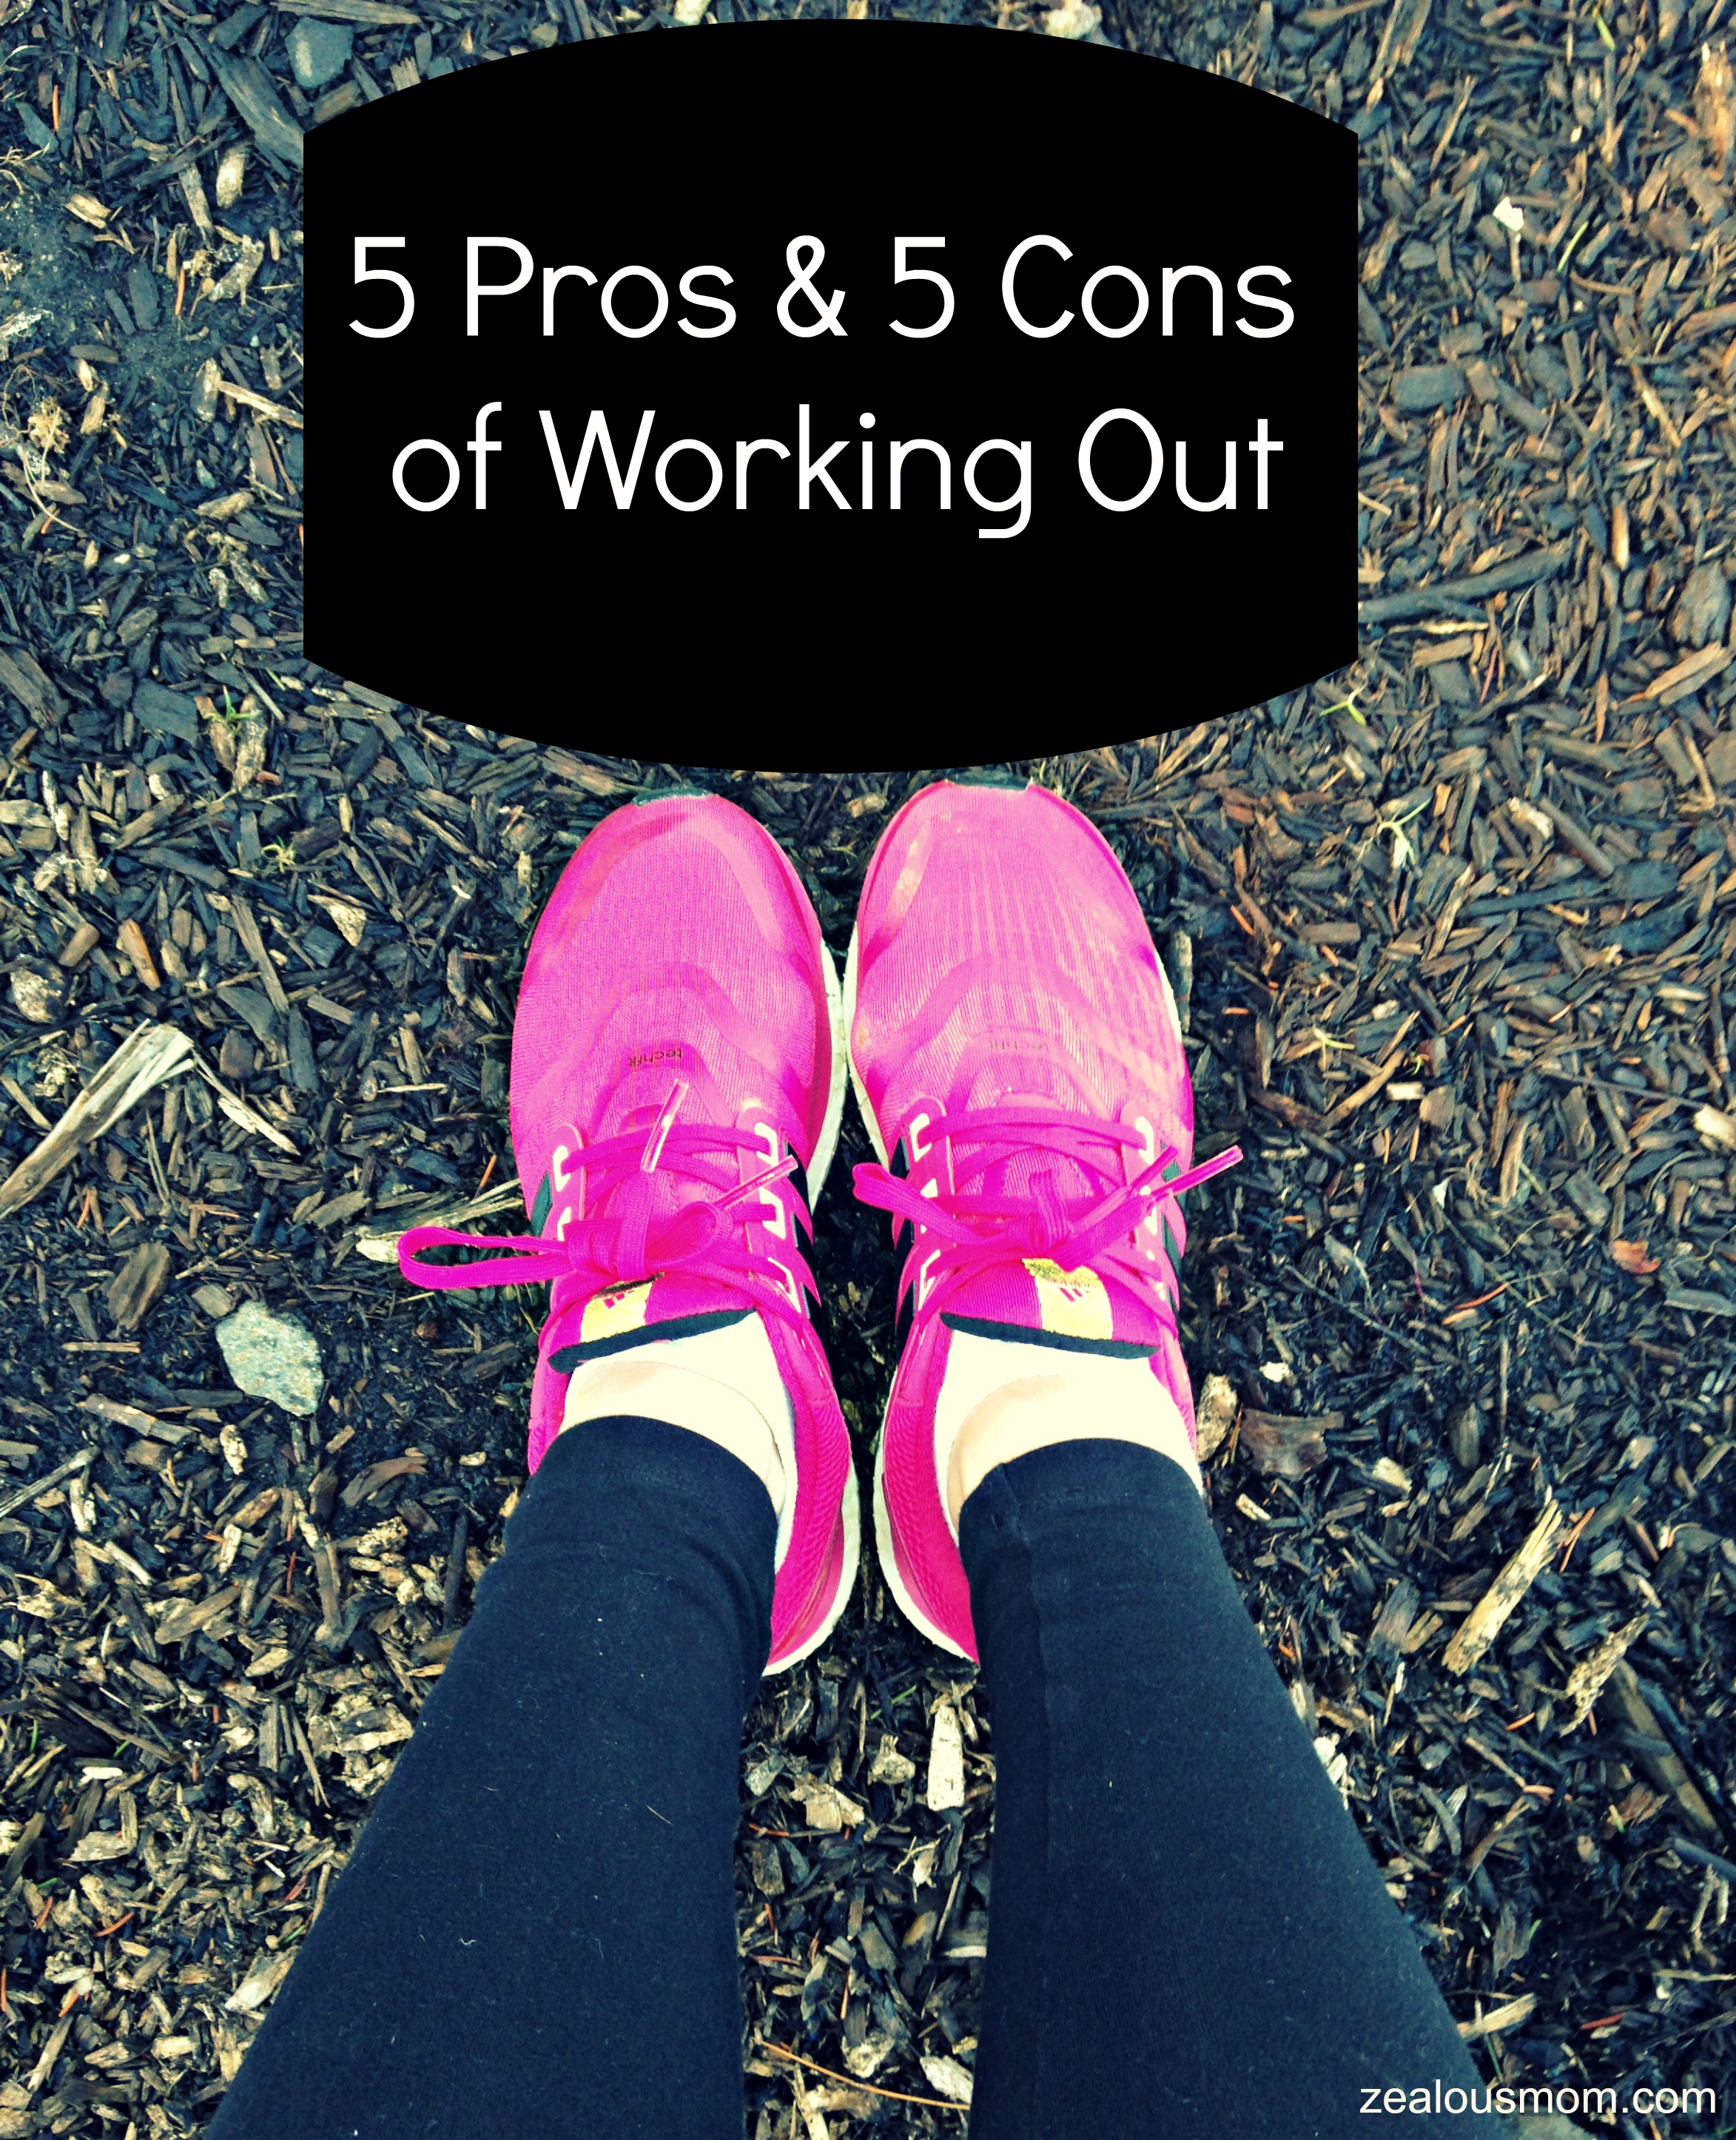 5 Pros & 5 Cons of Working Out